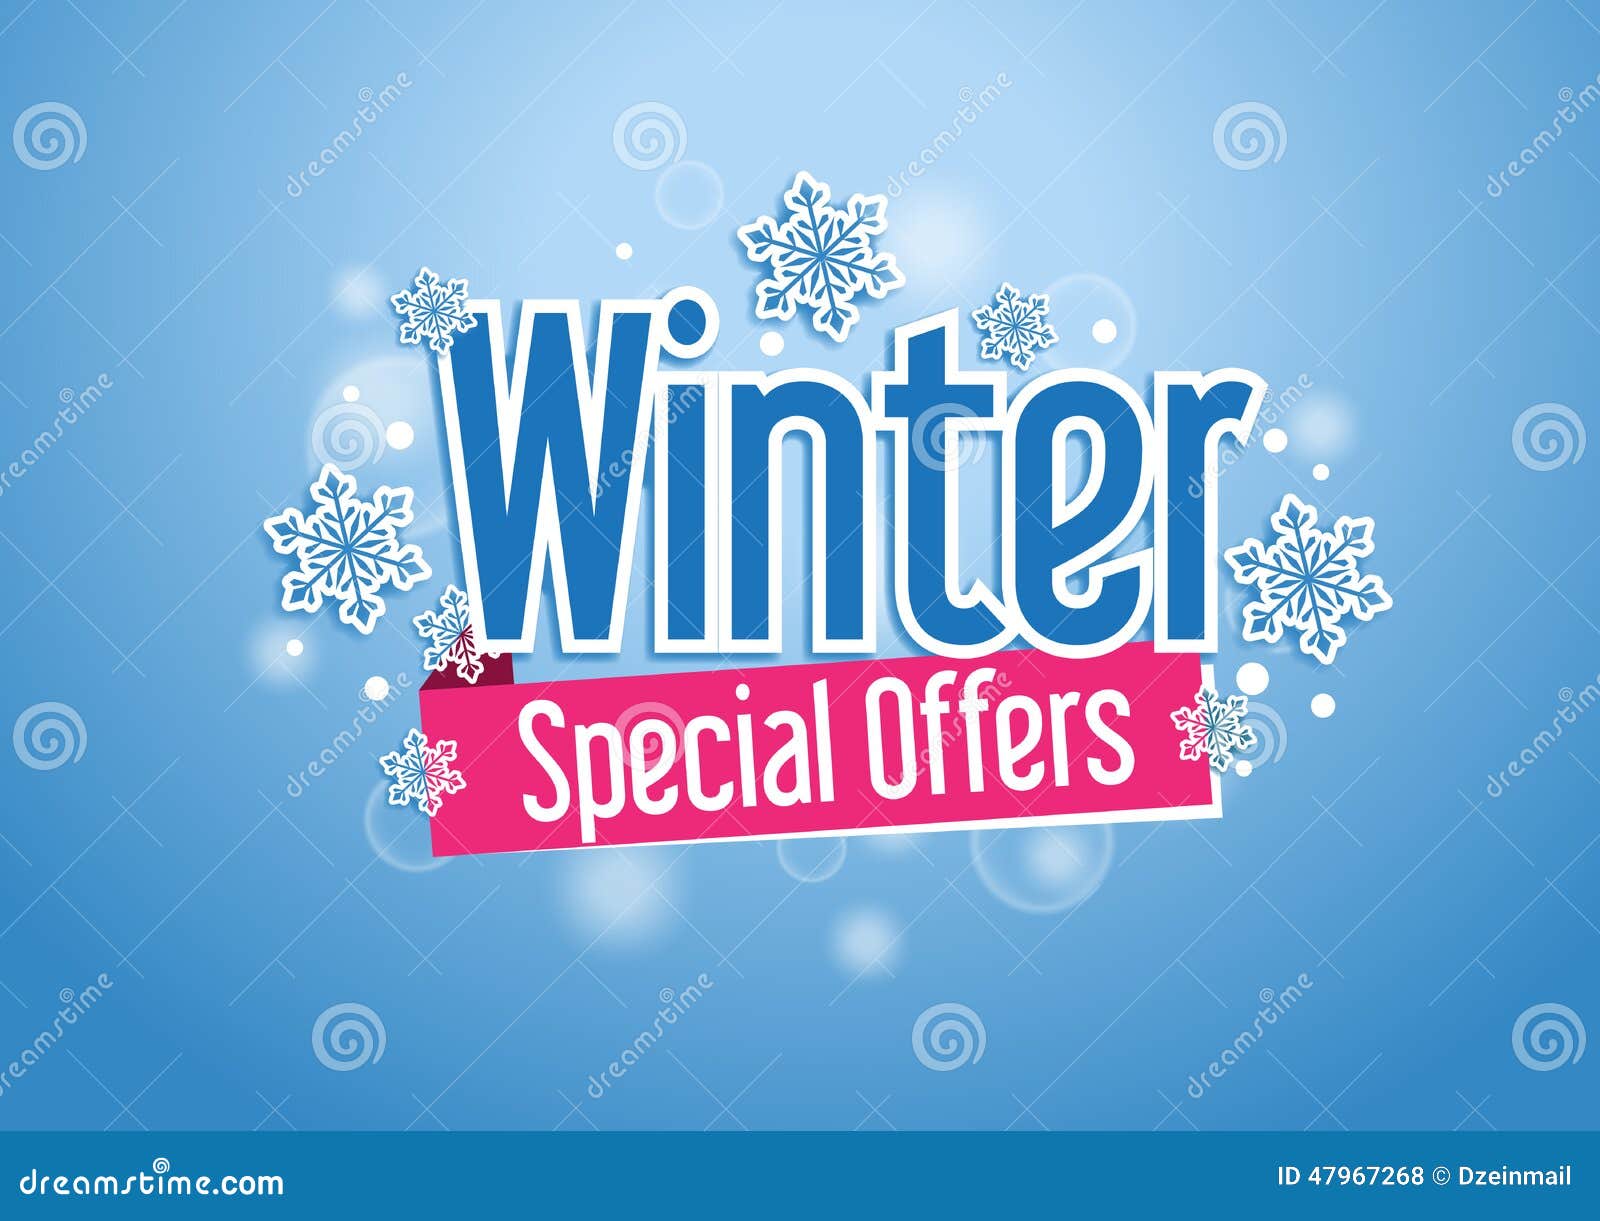 winter special offers word with snows in blue background